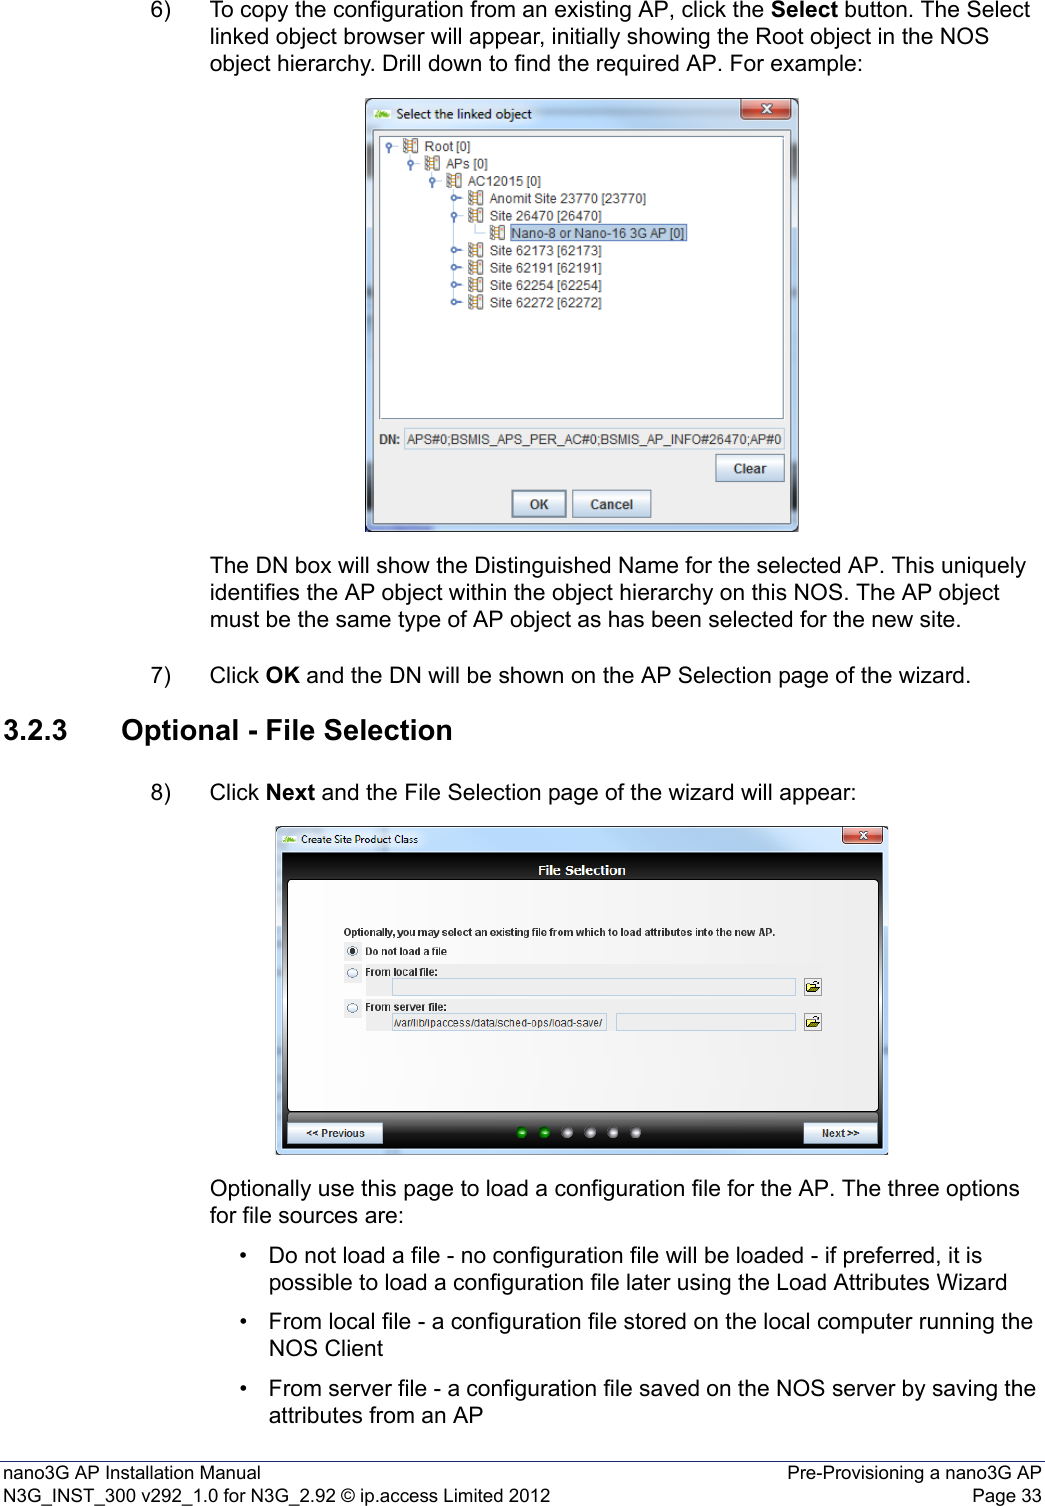 nano3G AP Installation Manual Pre-Provisioning a nano3G APN3G_INST_300 v292_1.0 for N3G_2.92 © ip.access Limited 2012 Page 336) To copy the configuration from an existing AP, click the Select button. The Select linked object browser will appear, initially showing the Root object in the NOS object hierarchy. Drill down to find the required AP. For example: The DN box will show the Distinguished Name for the selected AP. This uniquely identifies the AP object within the object hierarchy on this NOS. The AP object must be the same type of AP object as has been selected for the new site.7) Click OK and the DN will be shown on the AP Selection page of the wizard. 3.2.3 Optional - File Selection8) Click Next and the File Selection page of the wizard will appear:Optionally use this page to load a configuration file for the AP. The three options for file sources are:• Do not load a file - no configuration file will be loaded - if preferred, it is possible to load a configuration file later using the Load Attributes Wizard• From local file - a configuration file stored on the local computer running the NOS Client • From server file - a configuration file saved on the NOS server by saving the attributes from an AP 